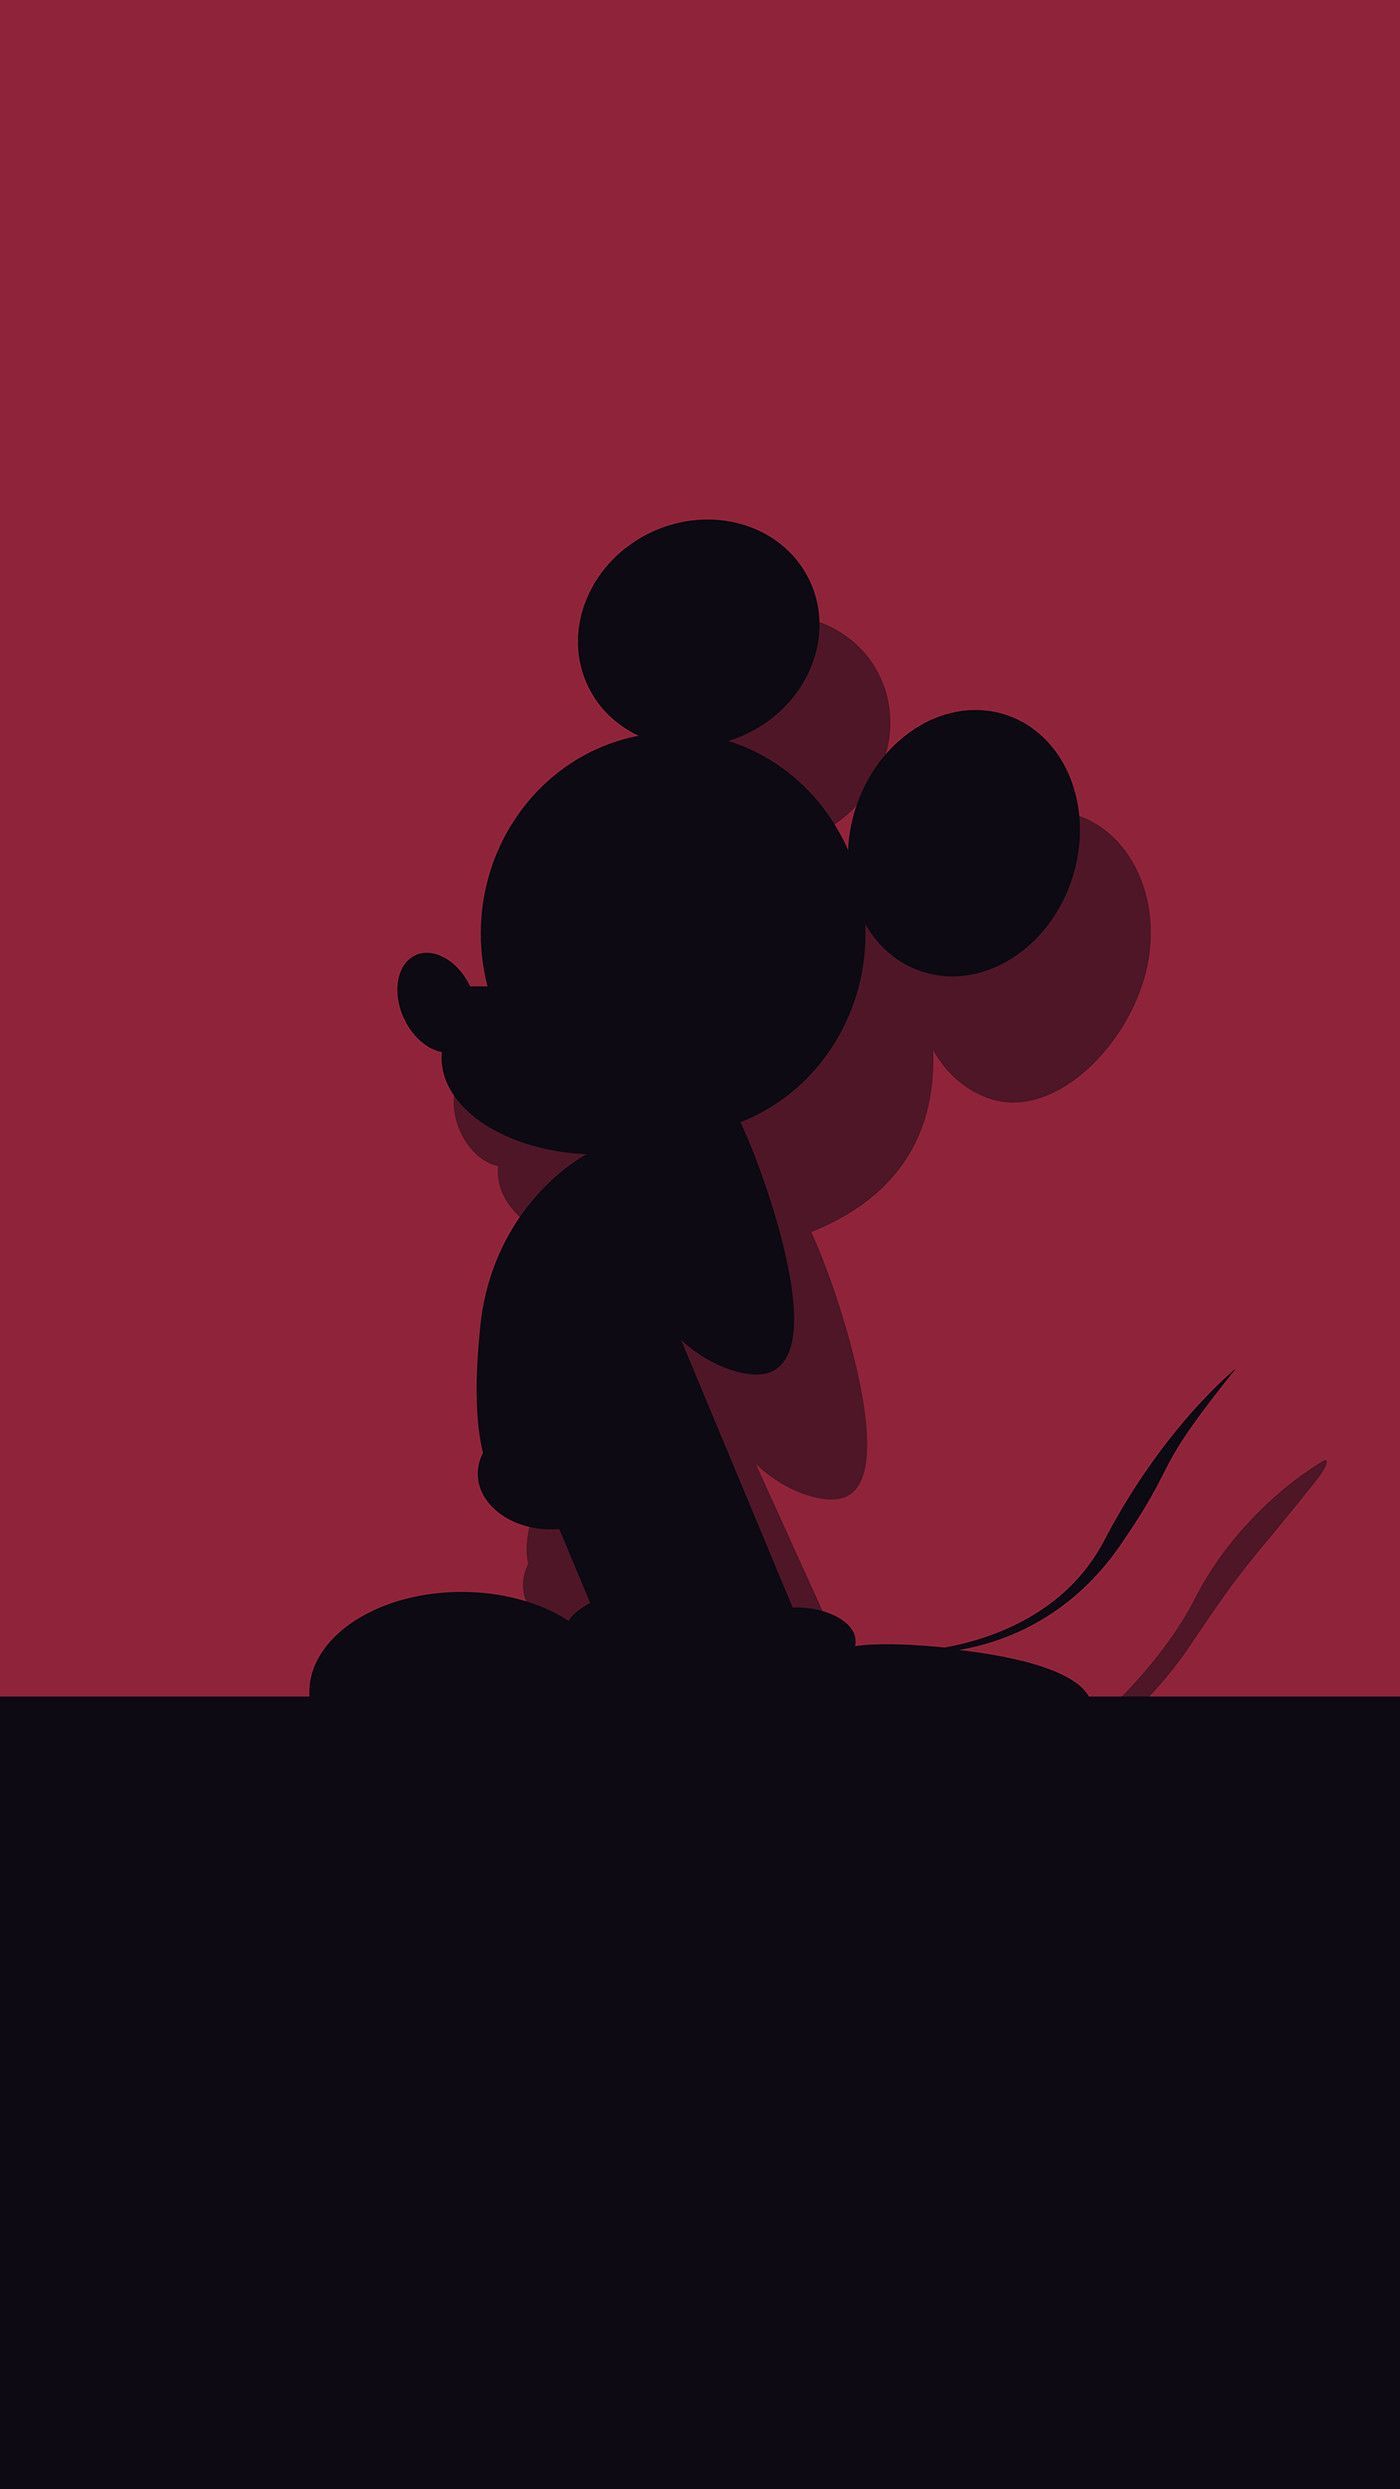 Mickey Mouse Phone Wallpaper Free Mickey Mouse Phone